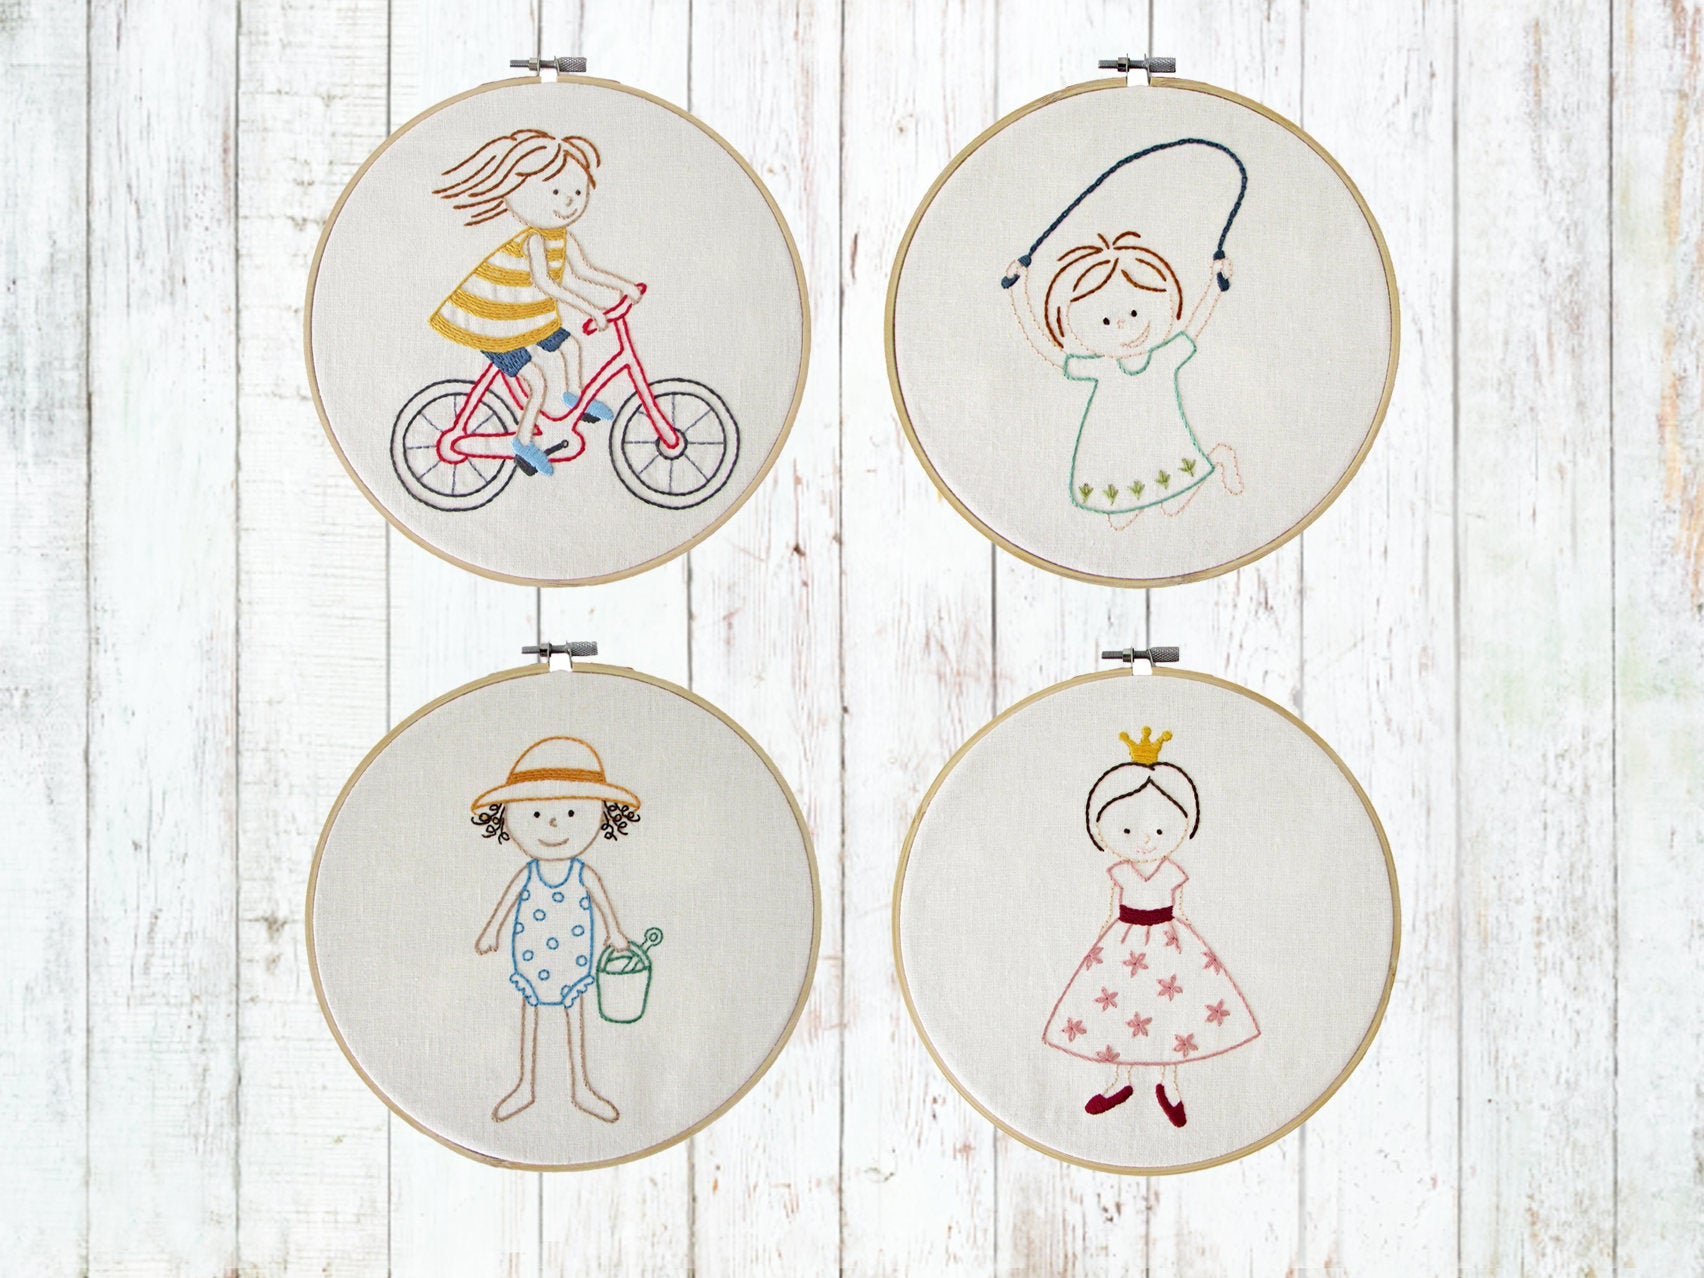 Kids Embroidery Patterns Hand Embroidery Pattern Bicycle Embroidery Kids Embroidery Summer Embroidery Pdf Instant Download